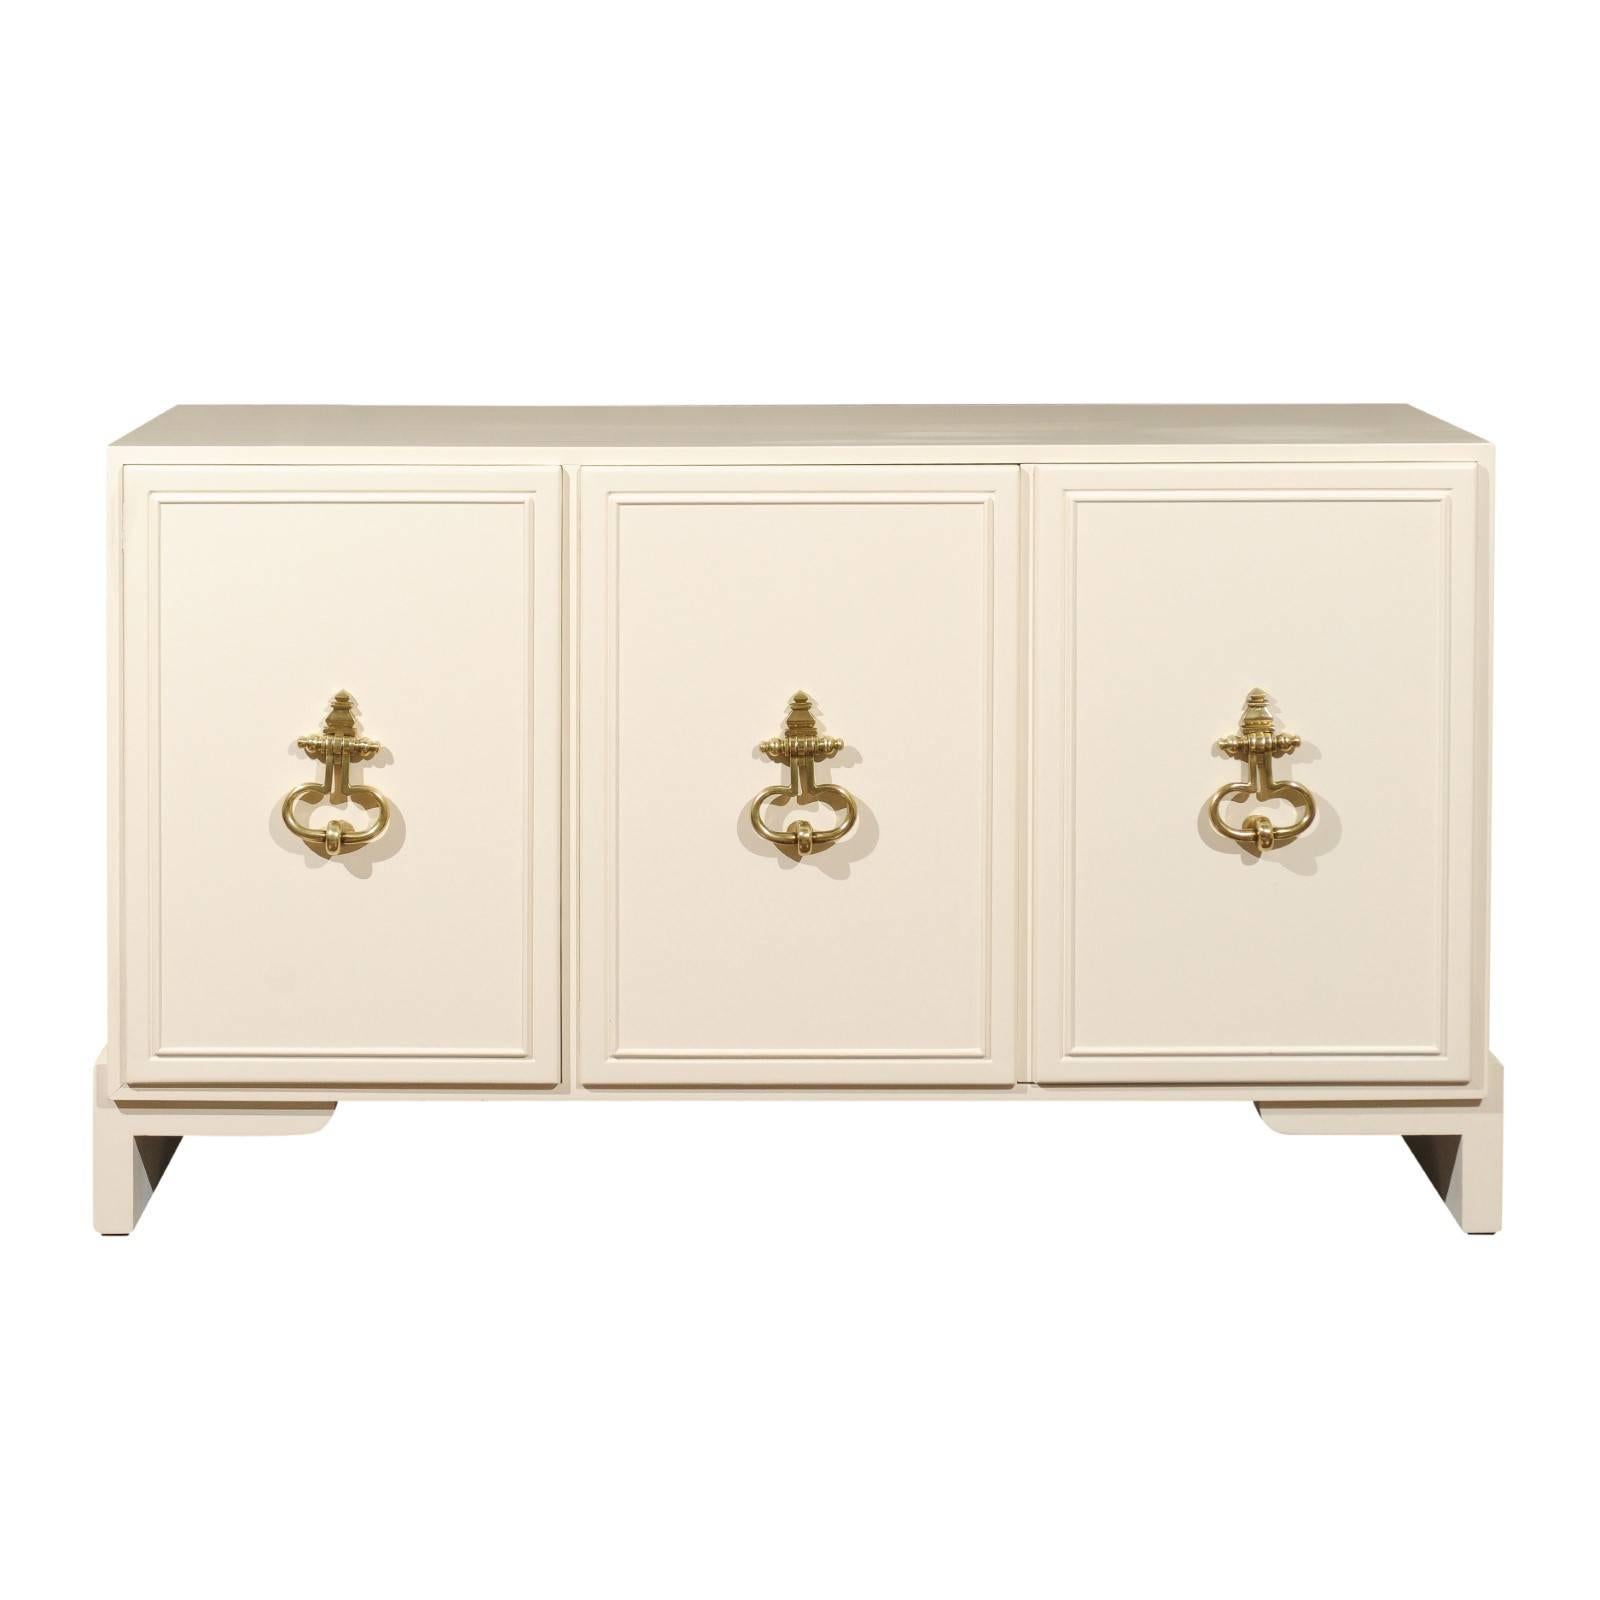 Fabulous Restored Parzinger Style Cabinet in Cream Lacquer, circa 1975 For Sale